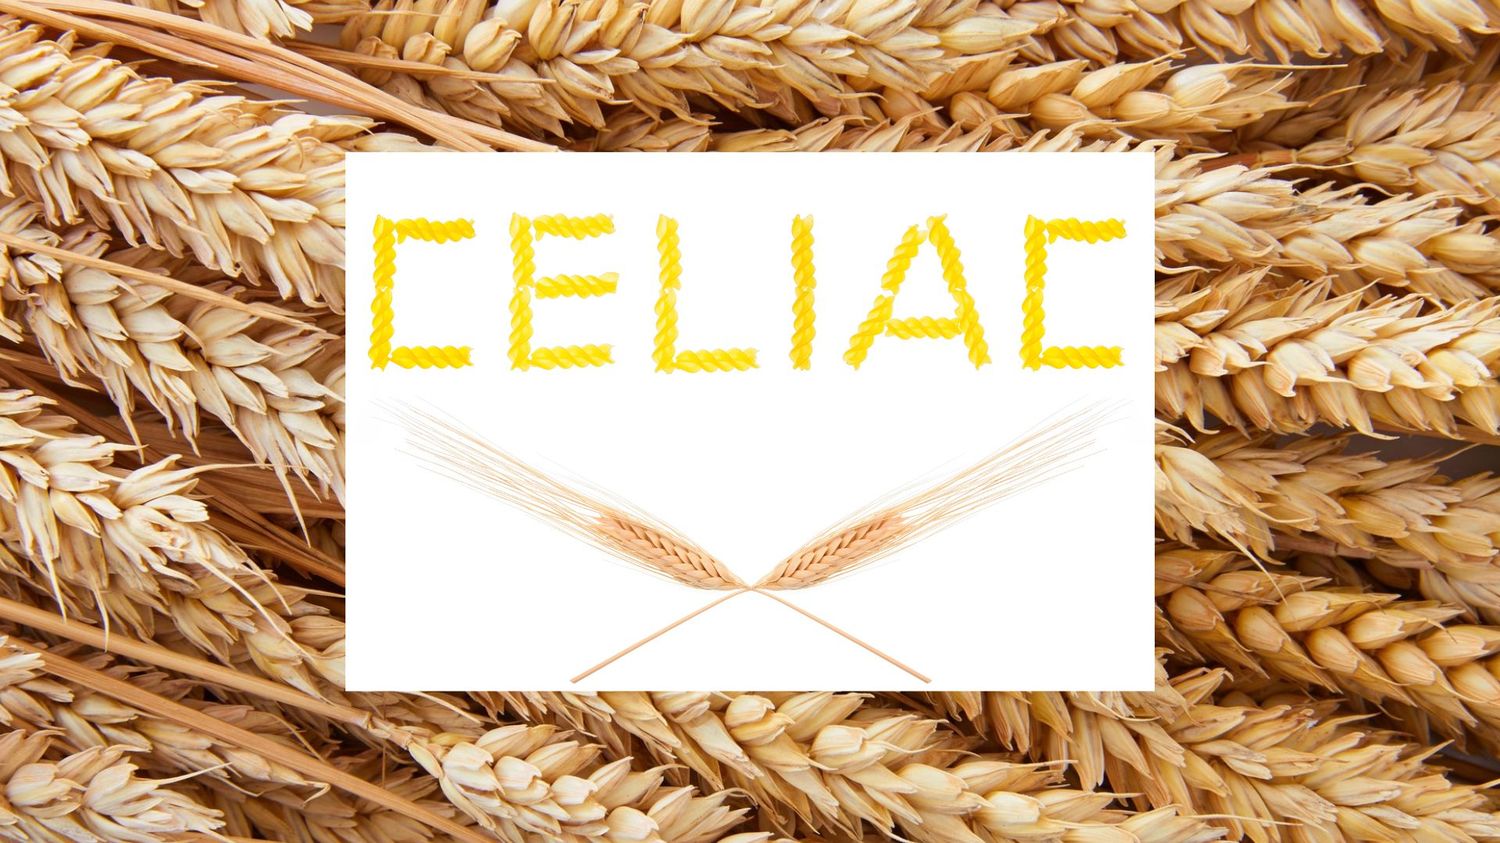 14-facts-about-facts-about-celiac-disease